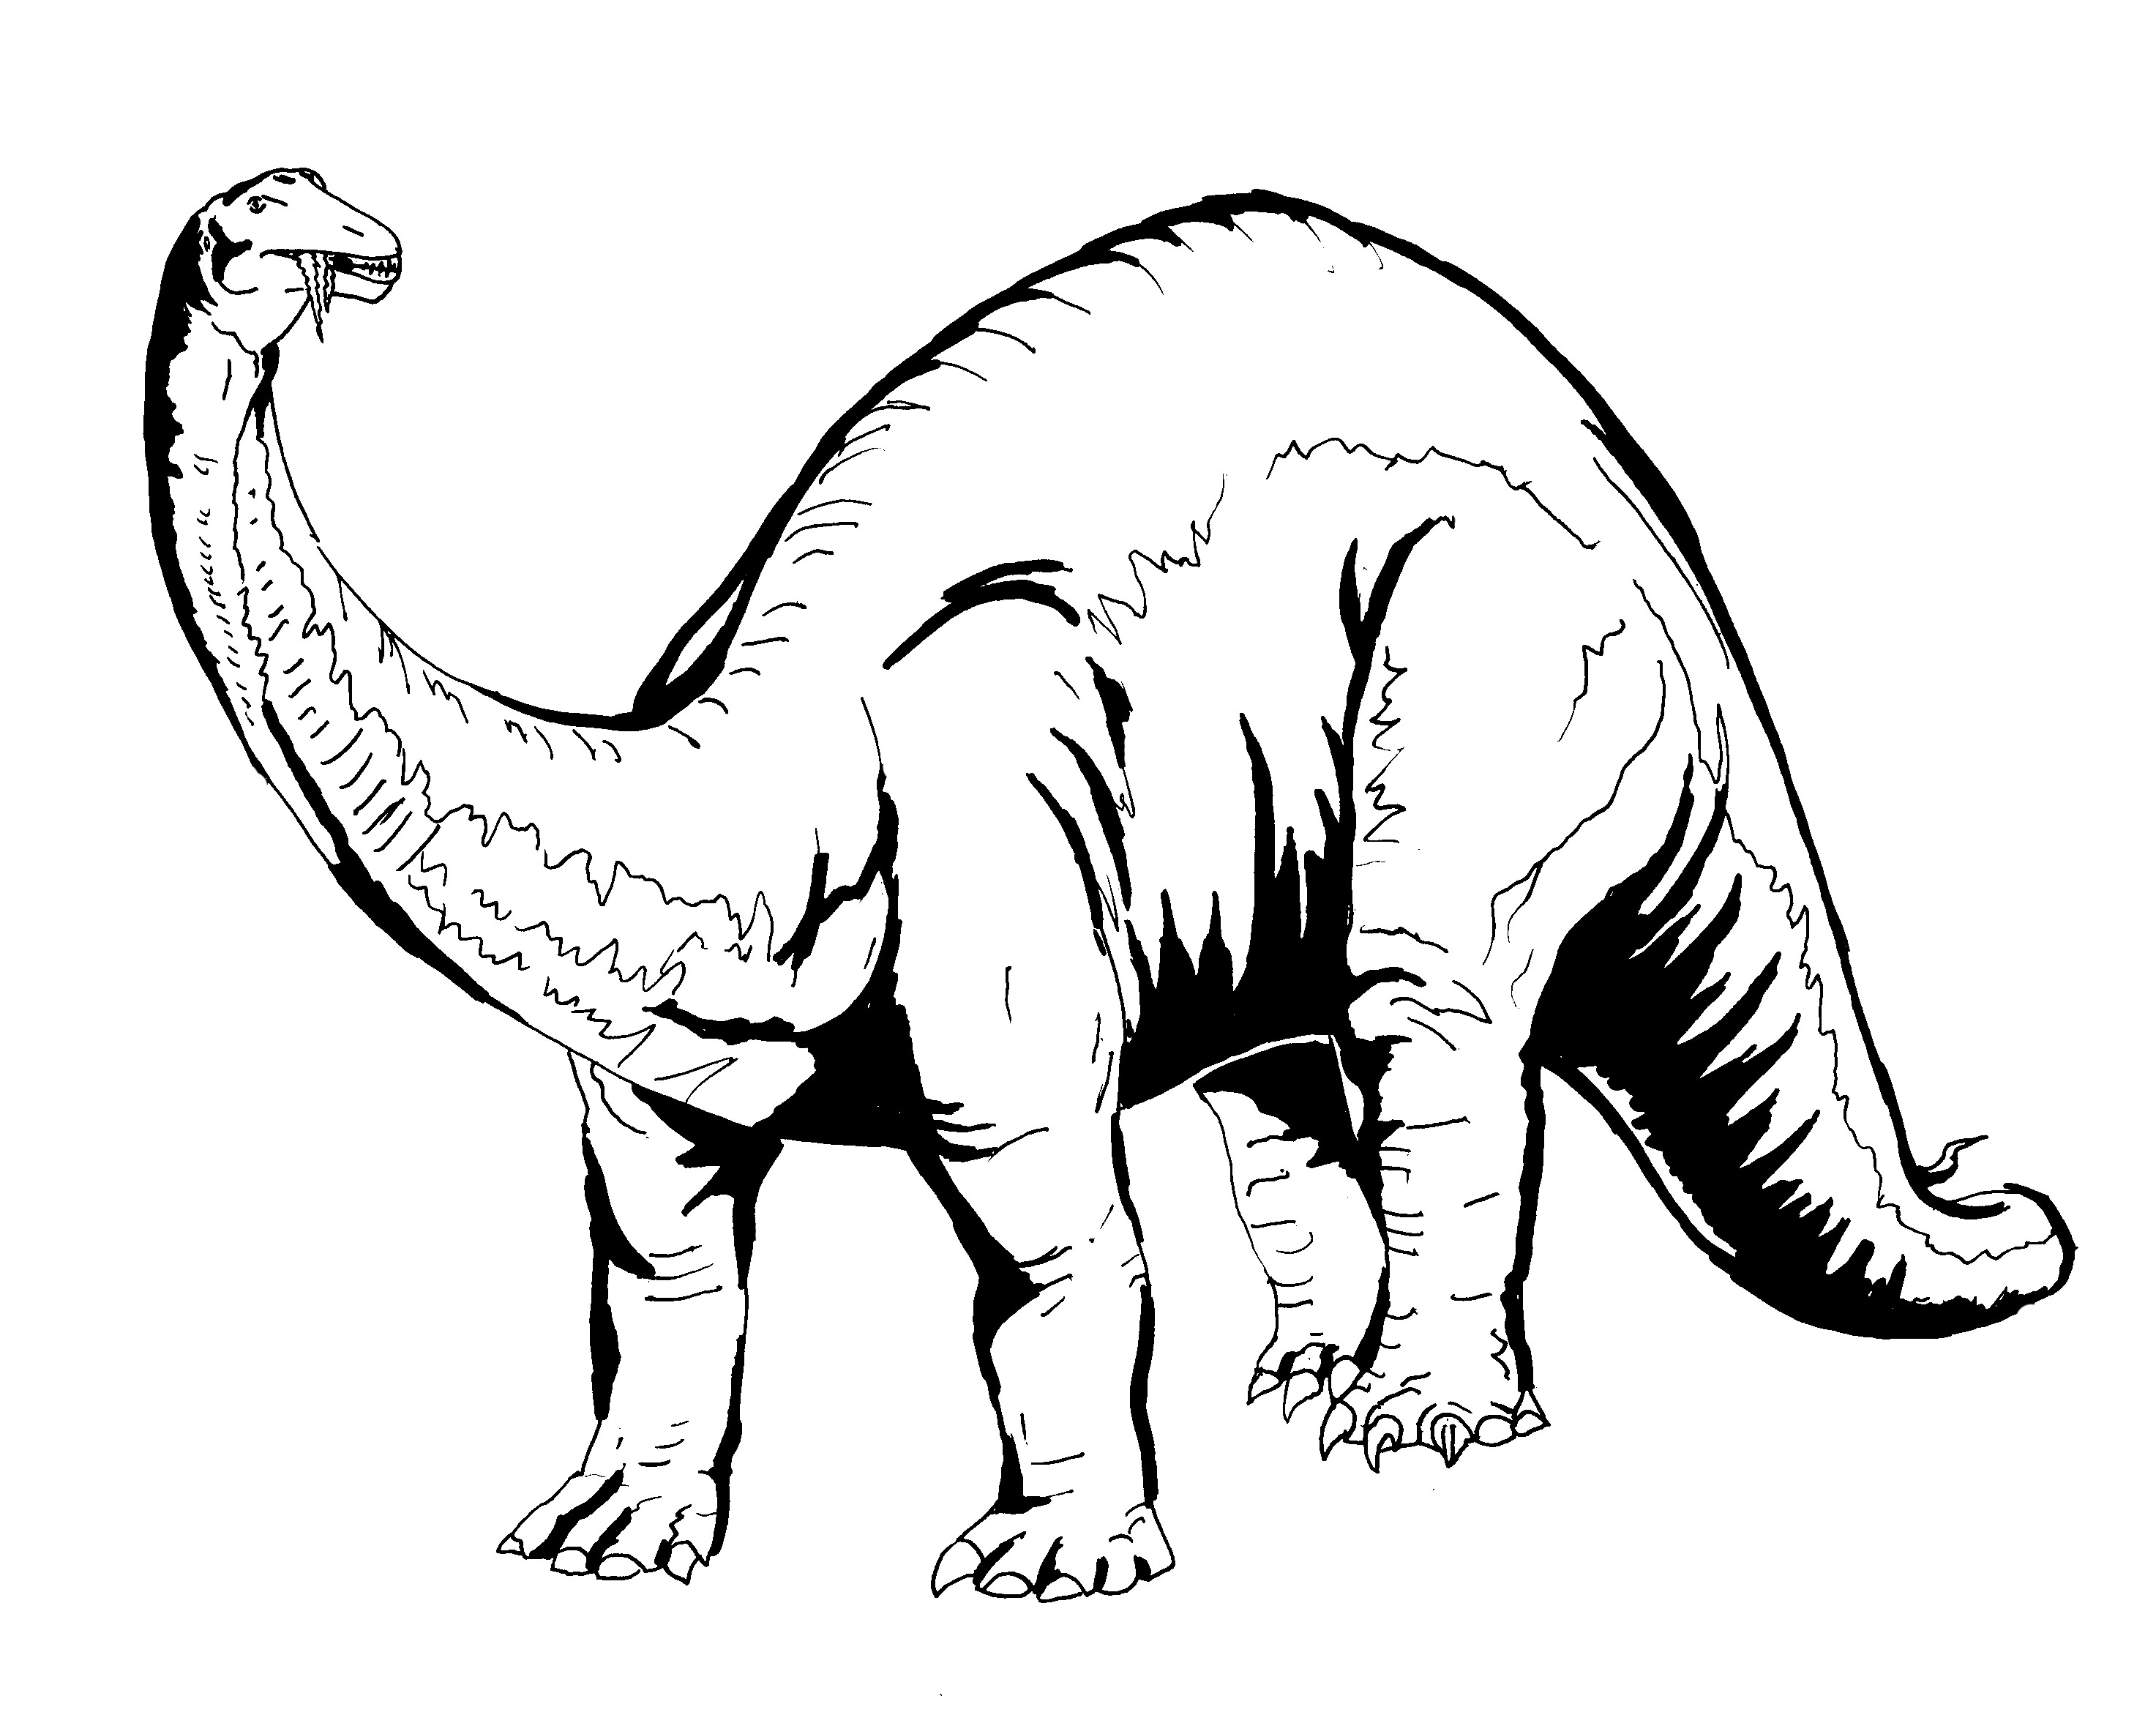 Dinosaur Coloring Pages 2018- Dr. Odd